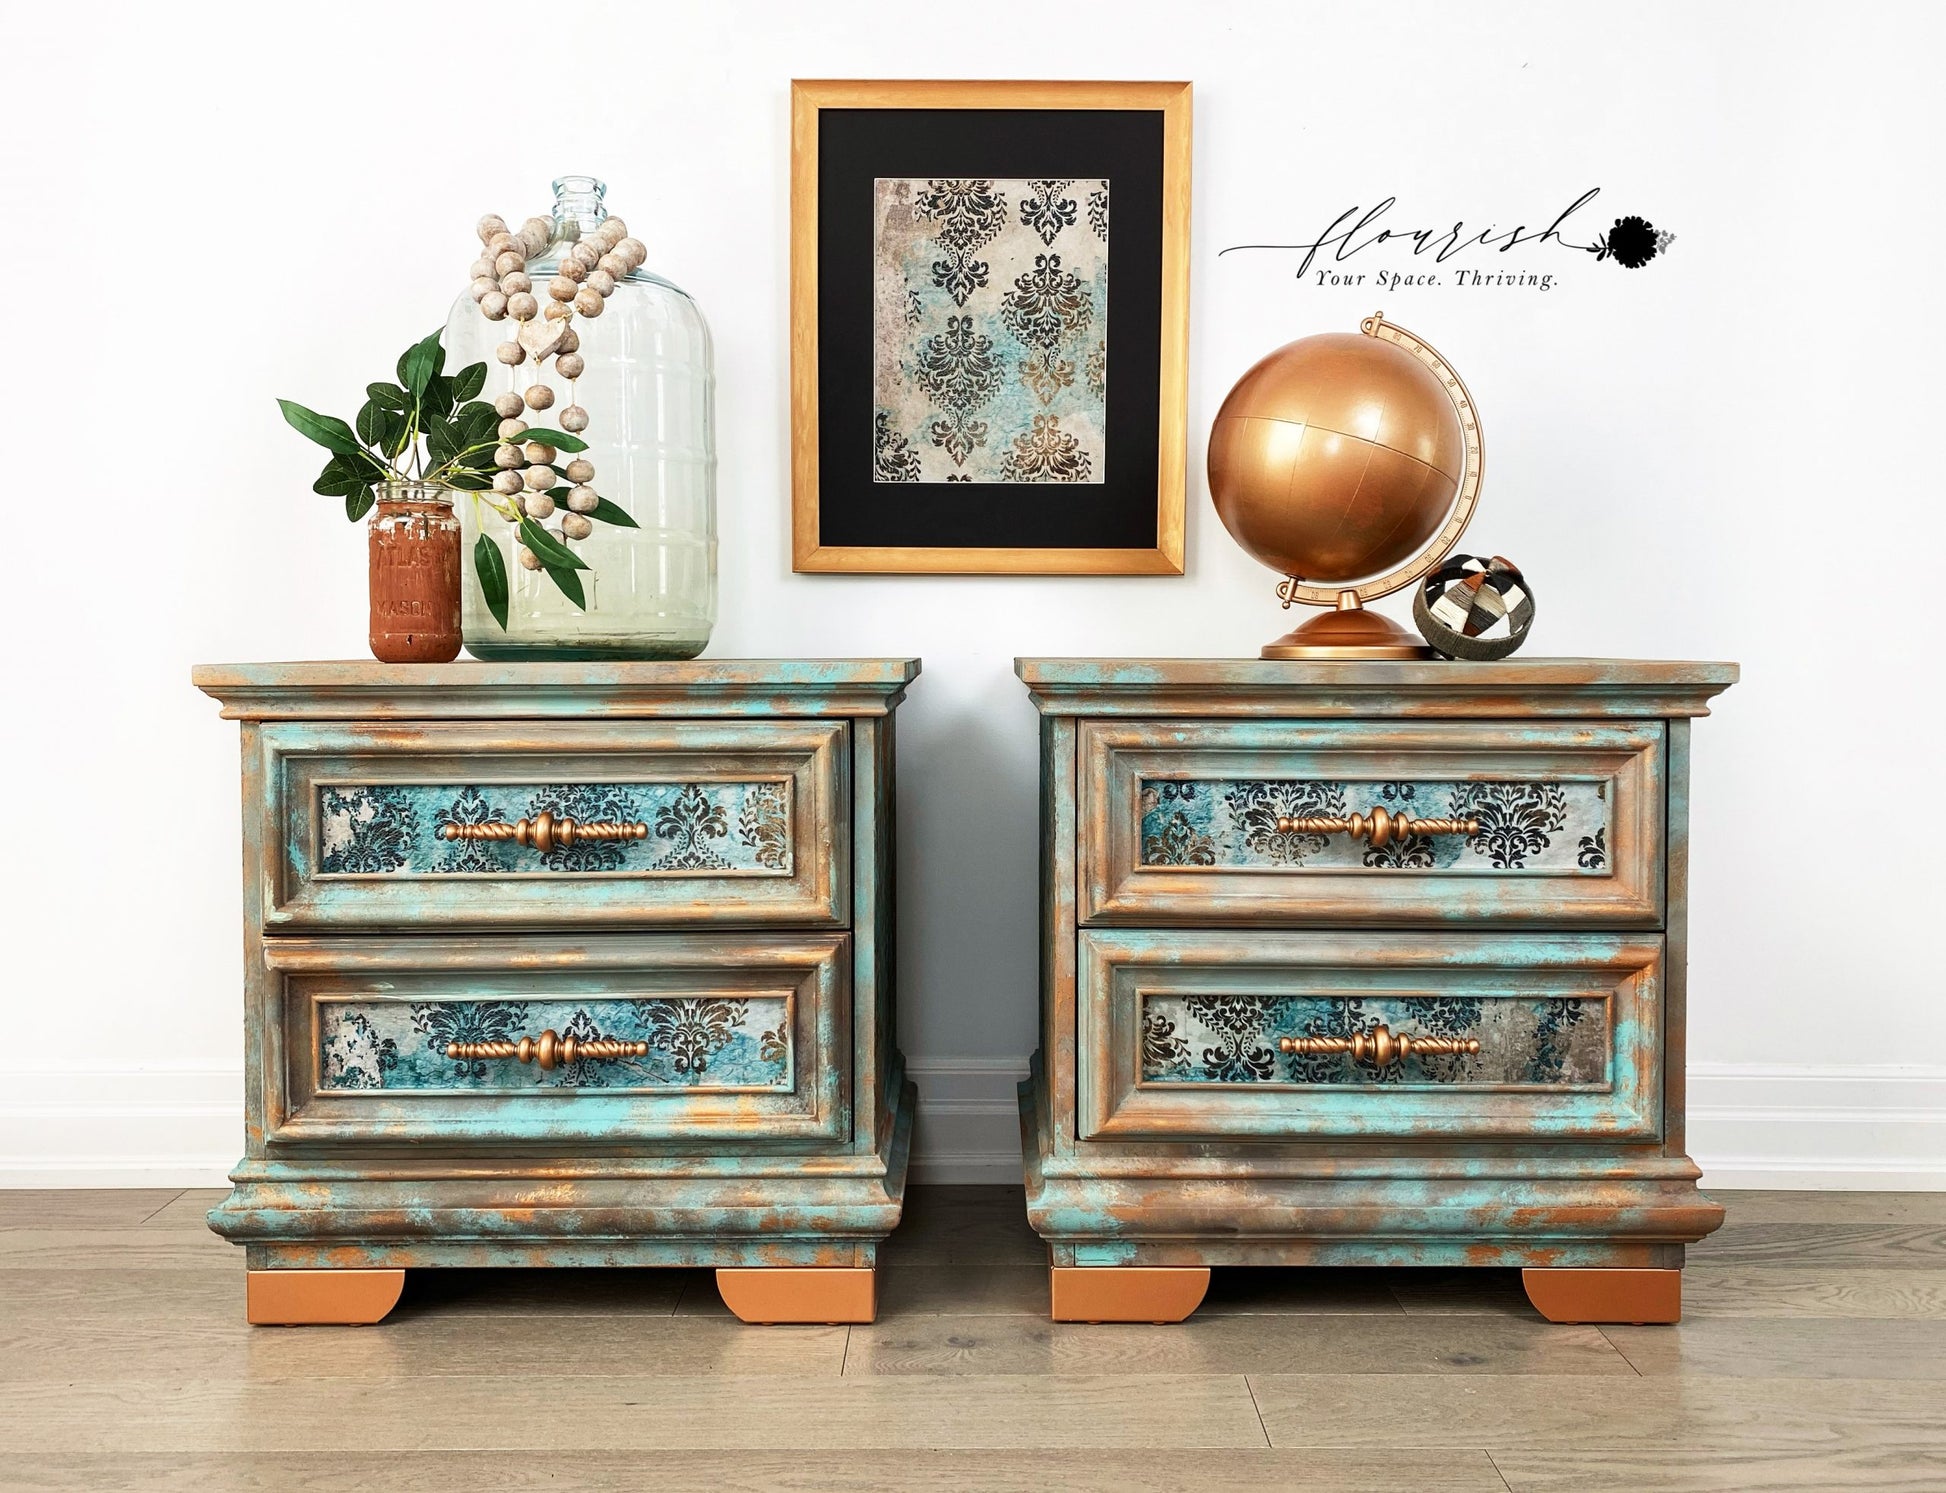 Patina flourish - Redesign découpage Redesign with Prima